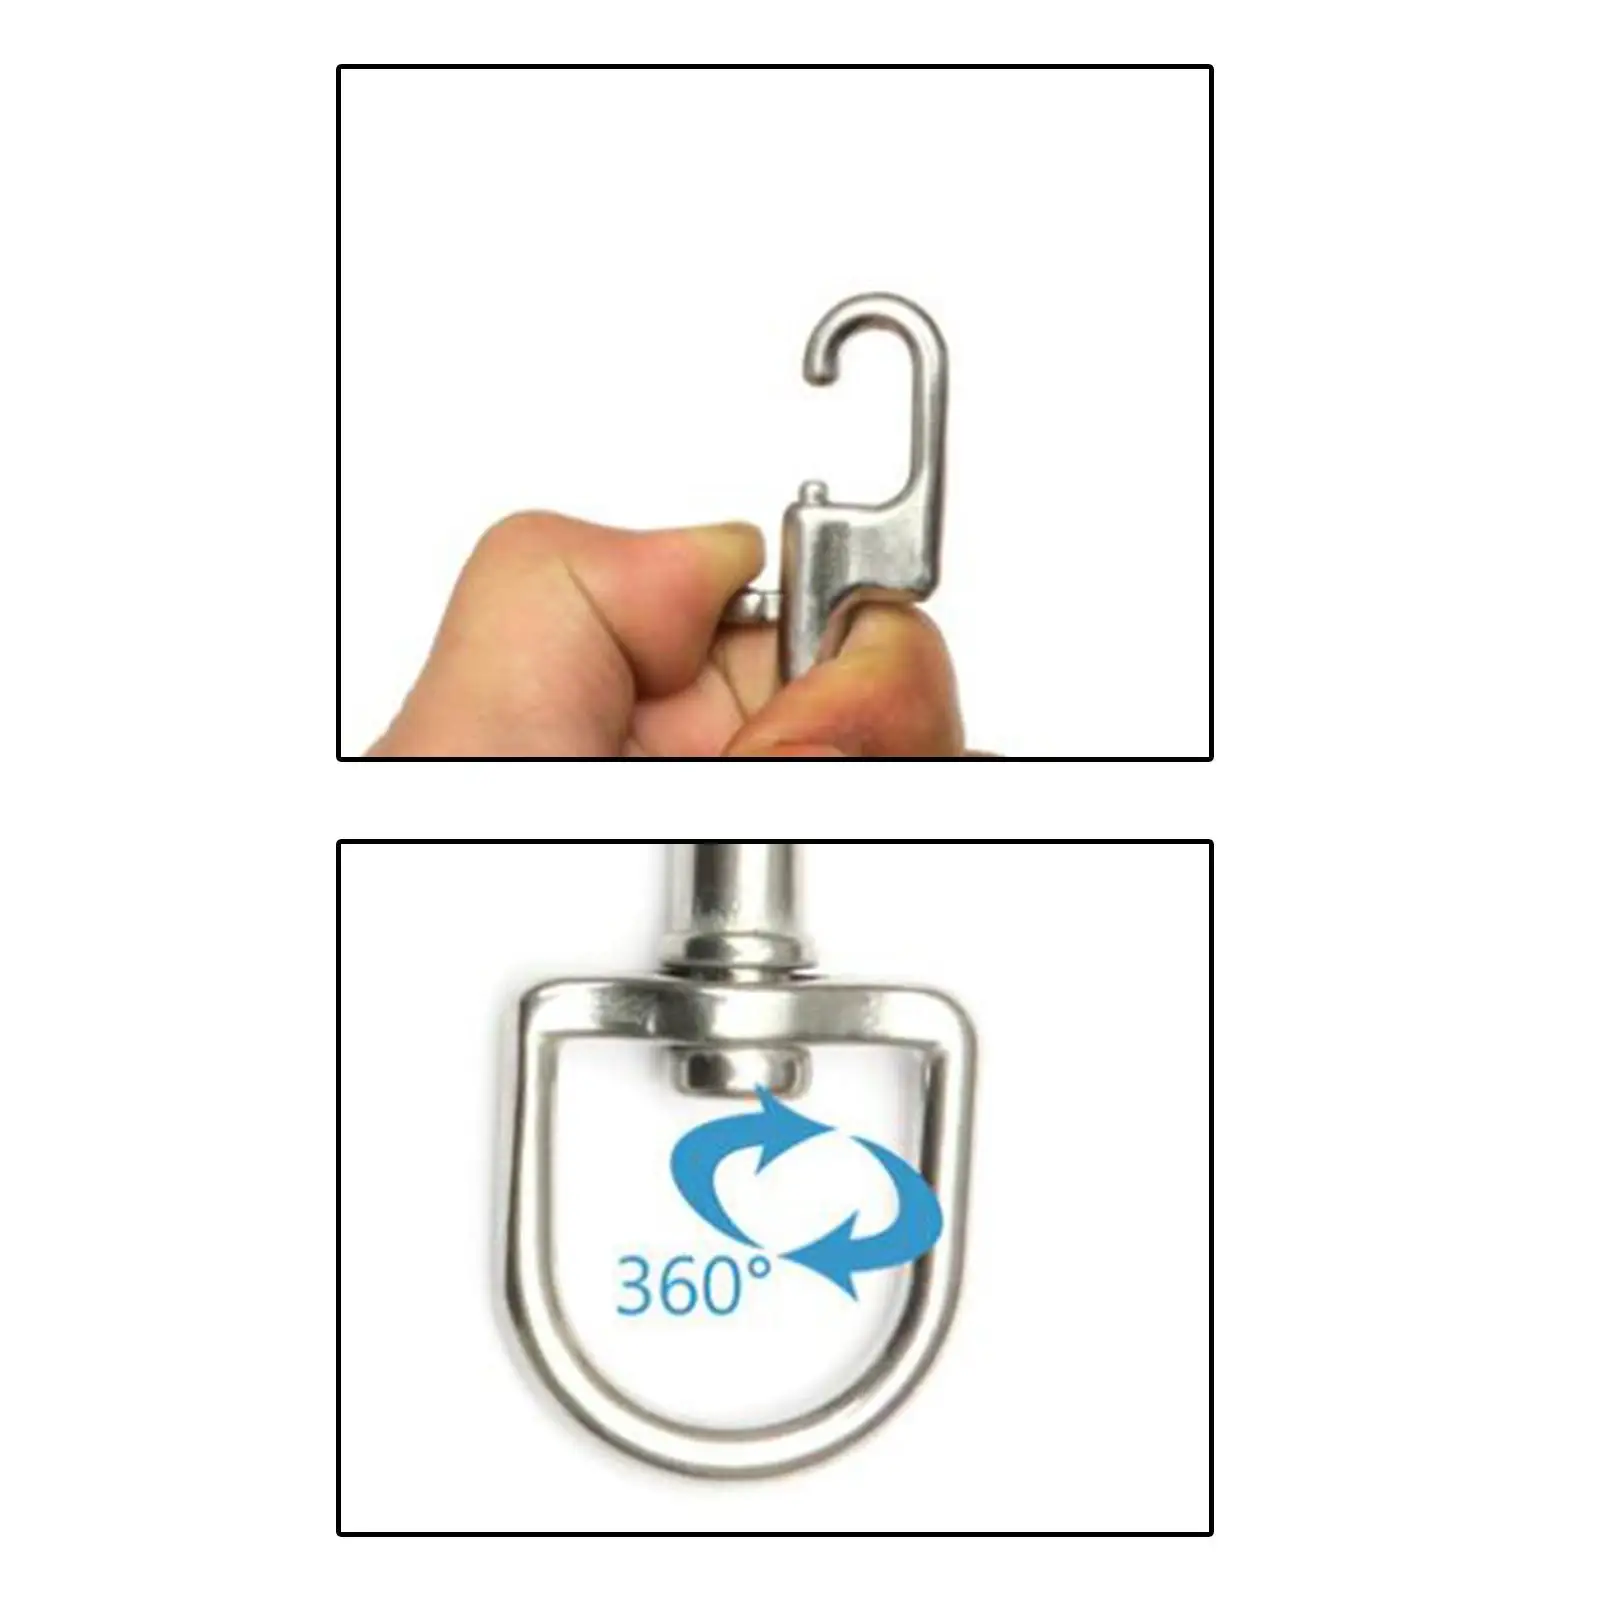 Dive Bolt Snap Hook Single Ended Hook Buckle Stainless Steel Swivel Snap Hook Clip for Scuba Diving Part Tool Accessories